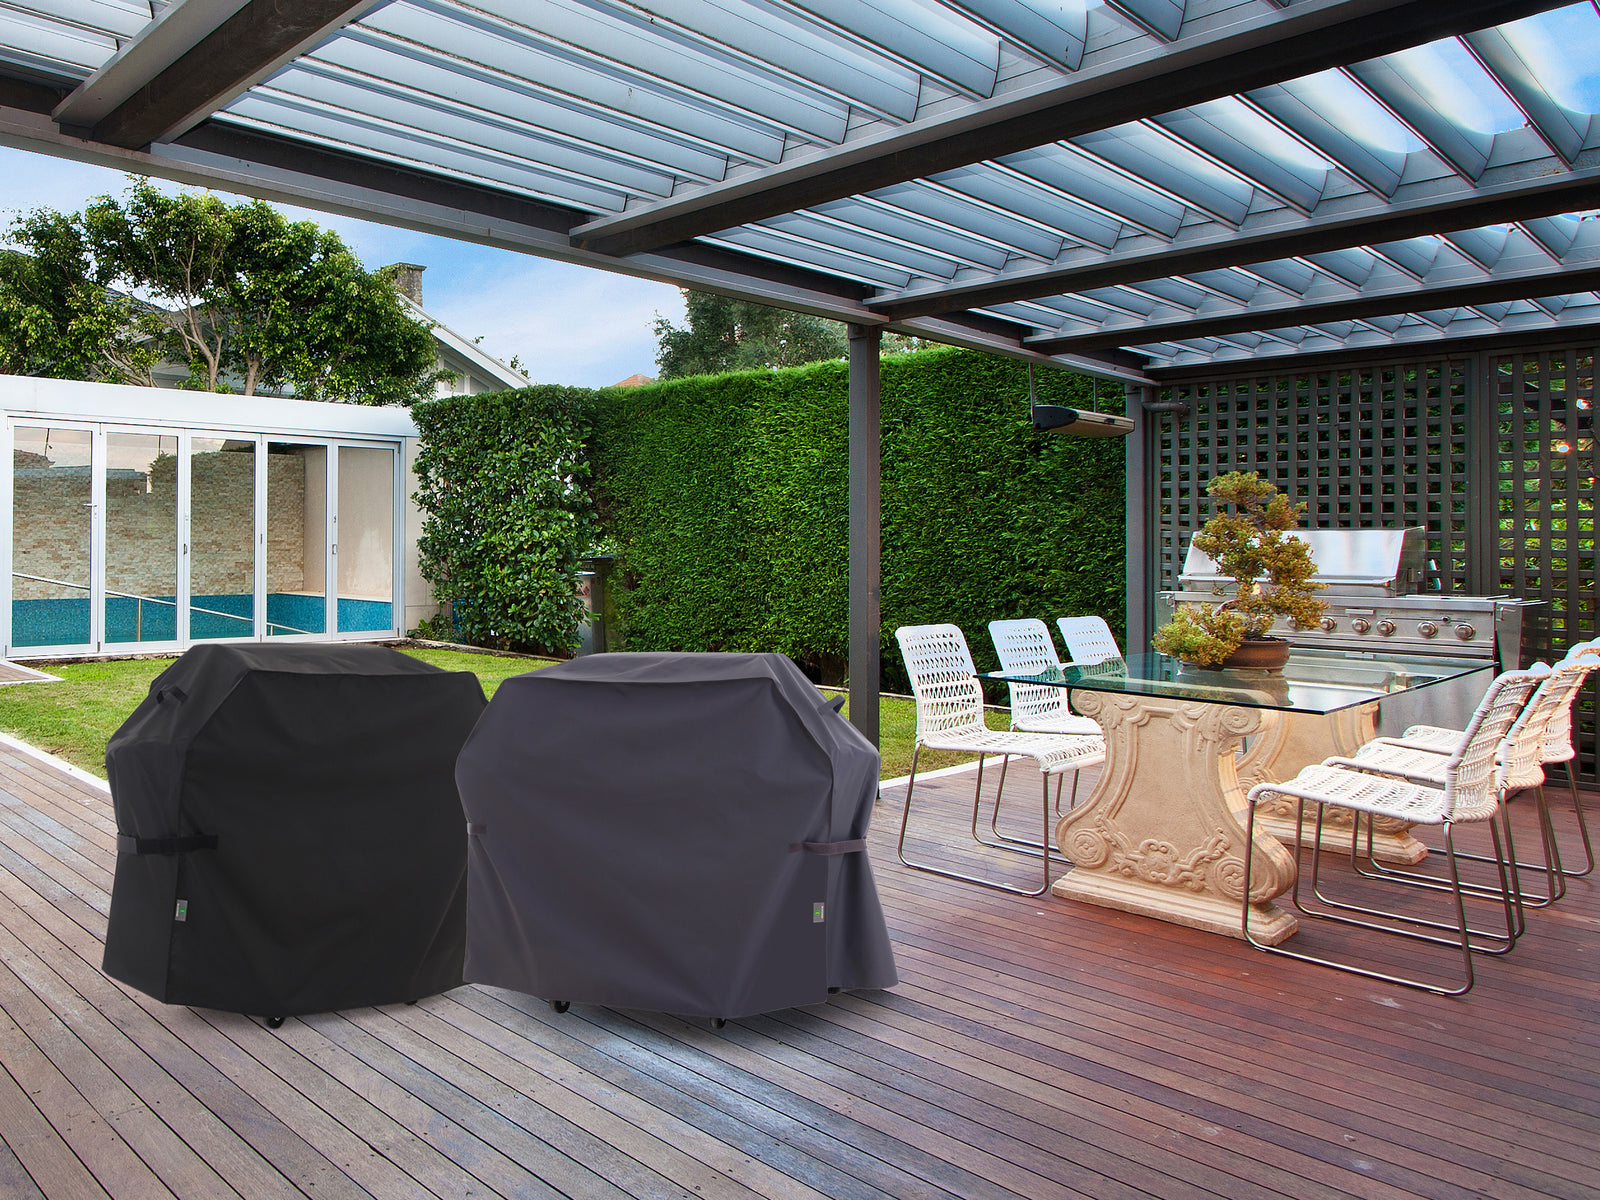 5 Reasons Why You Need Square Shaped Outdoor Furniture: Enhance Your Patio Experience